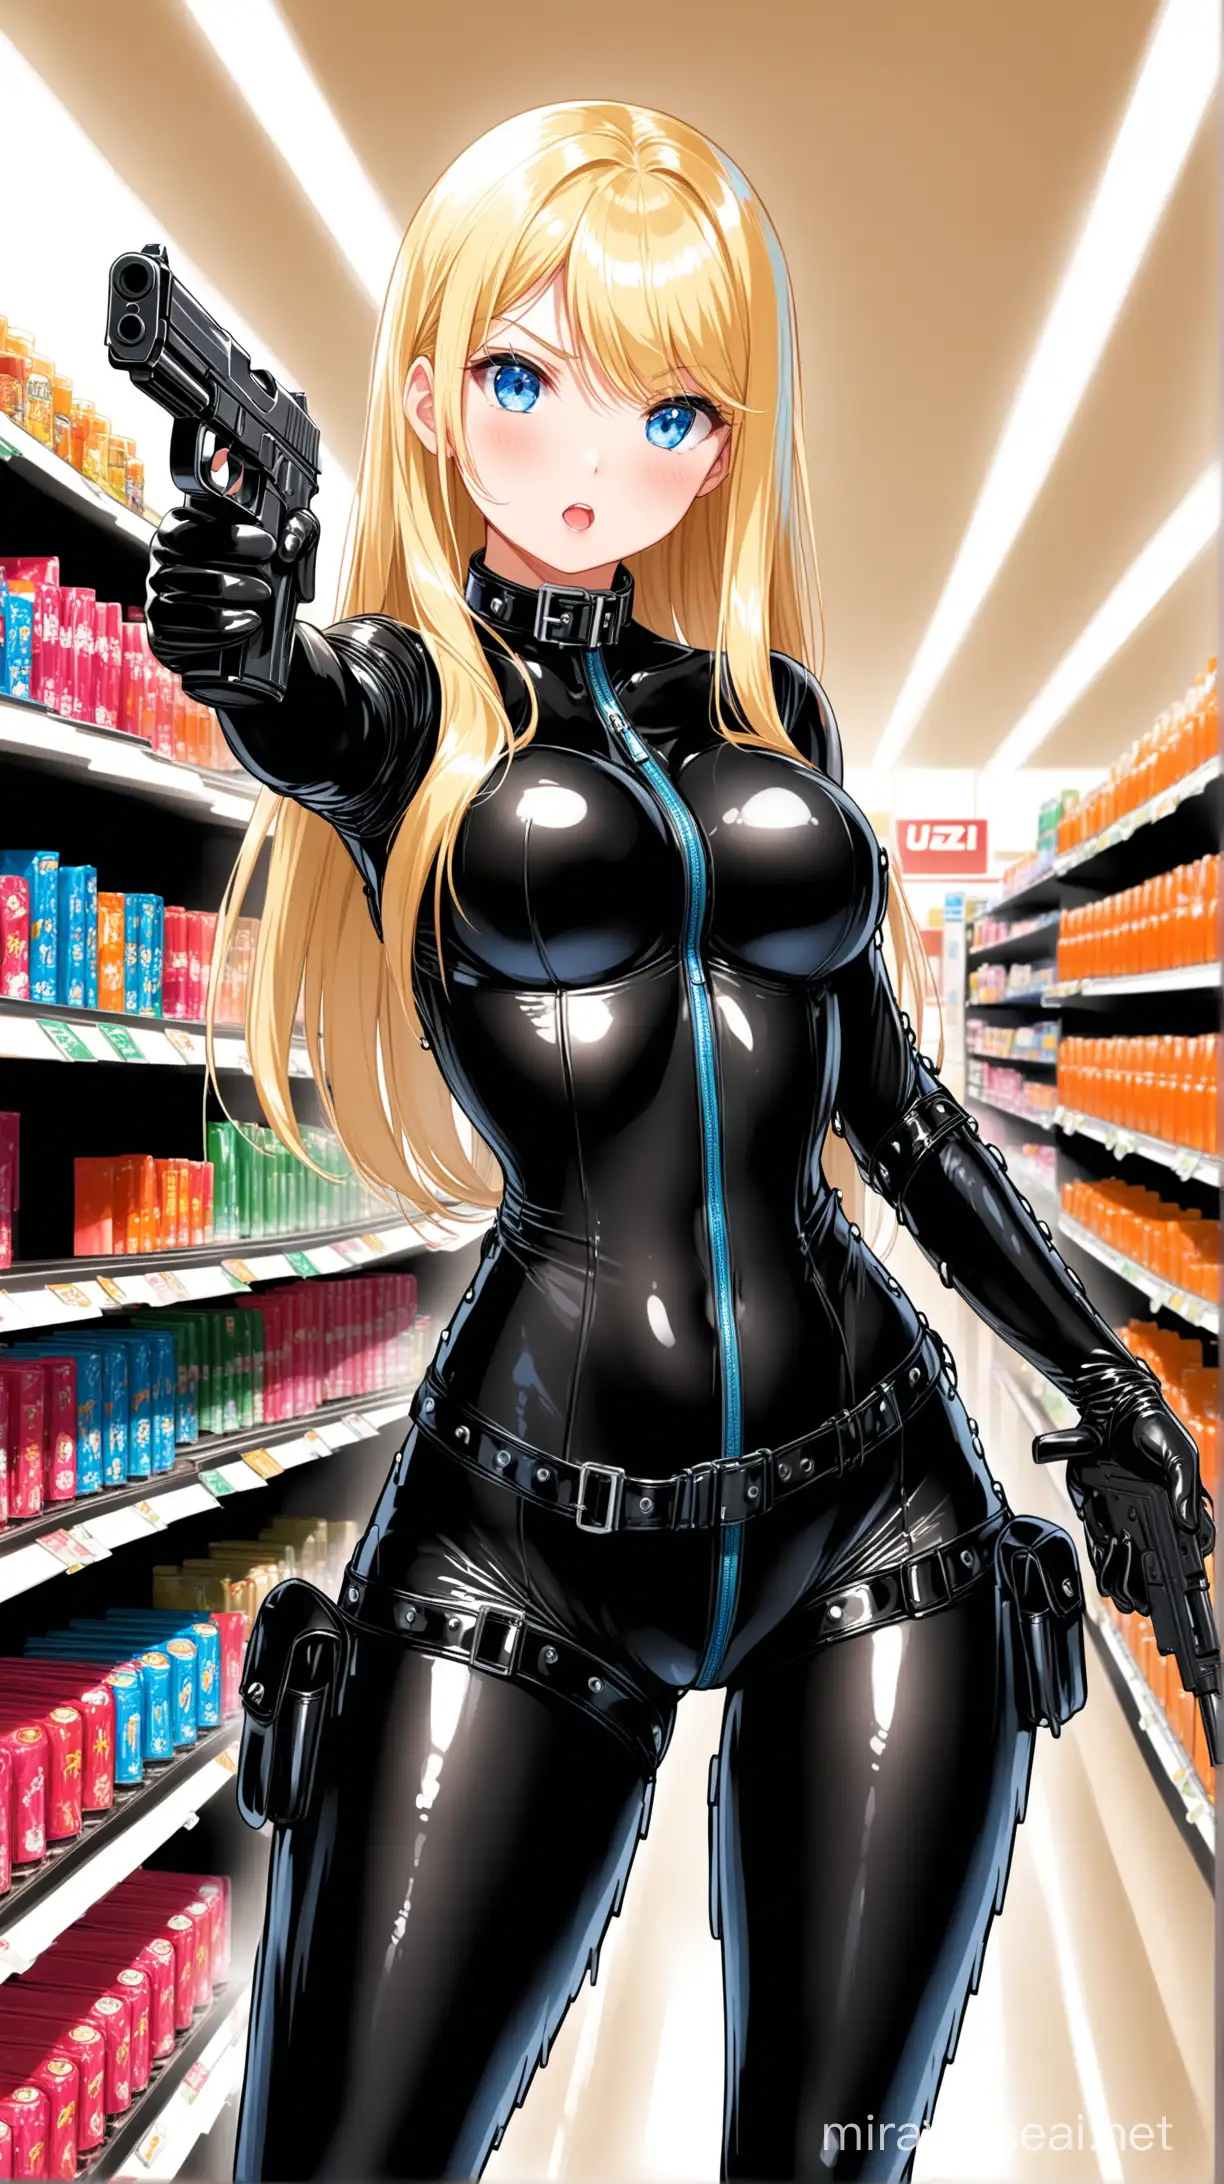 Blond Woman in Fetish Catsuit Aiming Uzi 9mm in Convenience Store